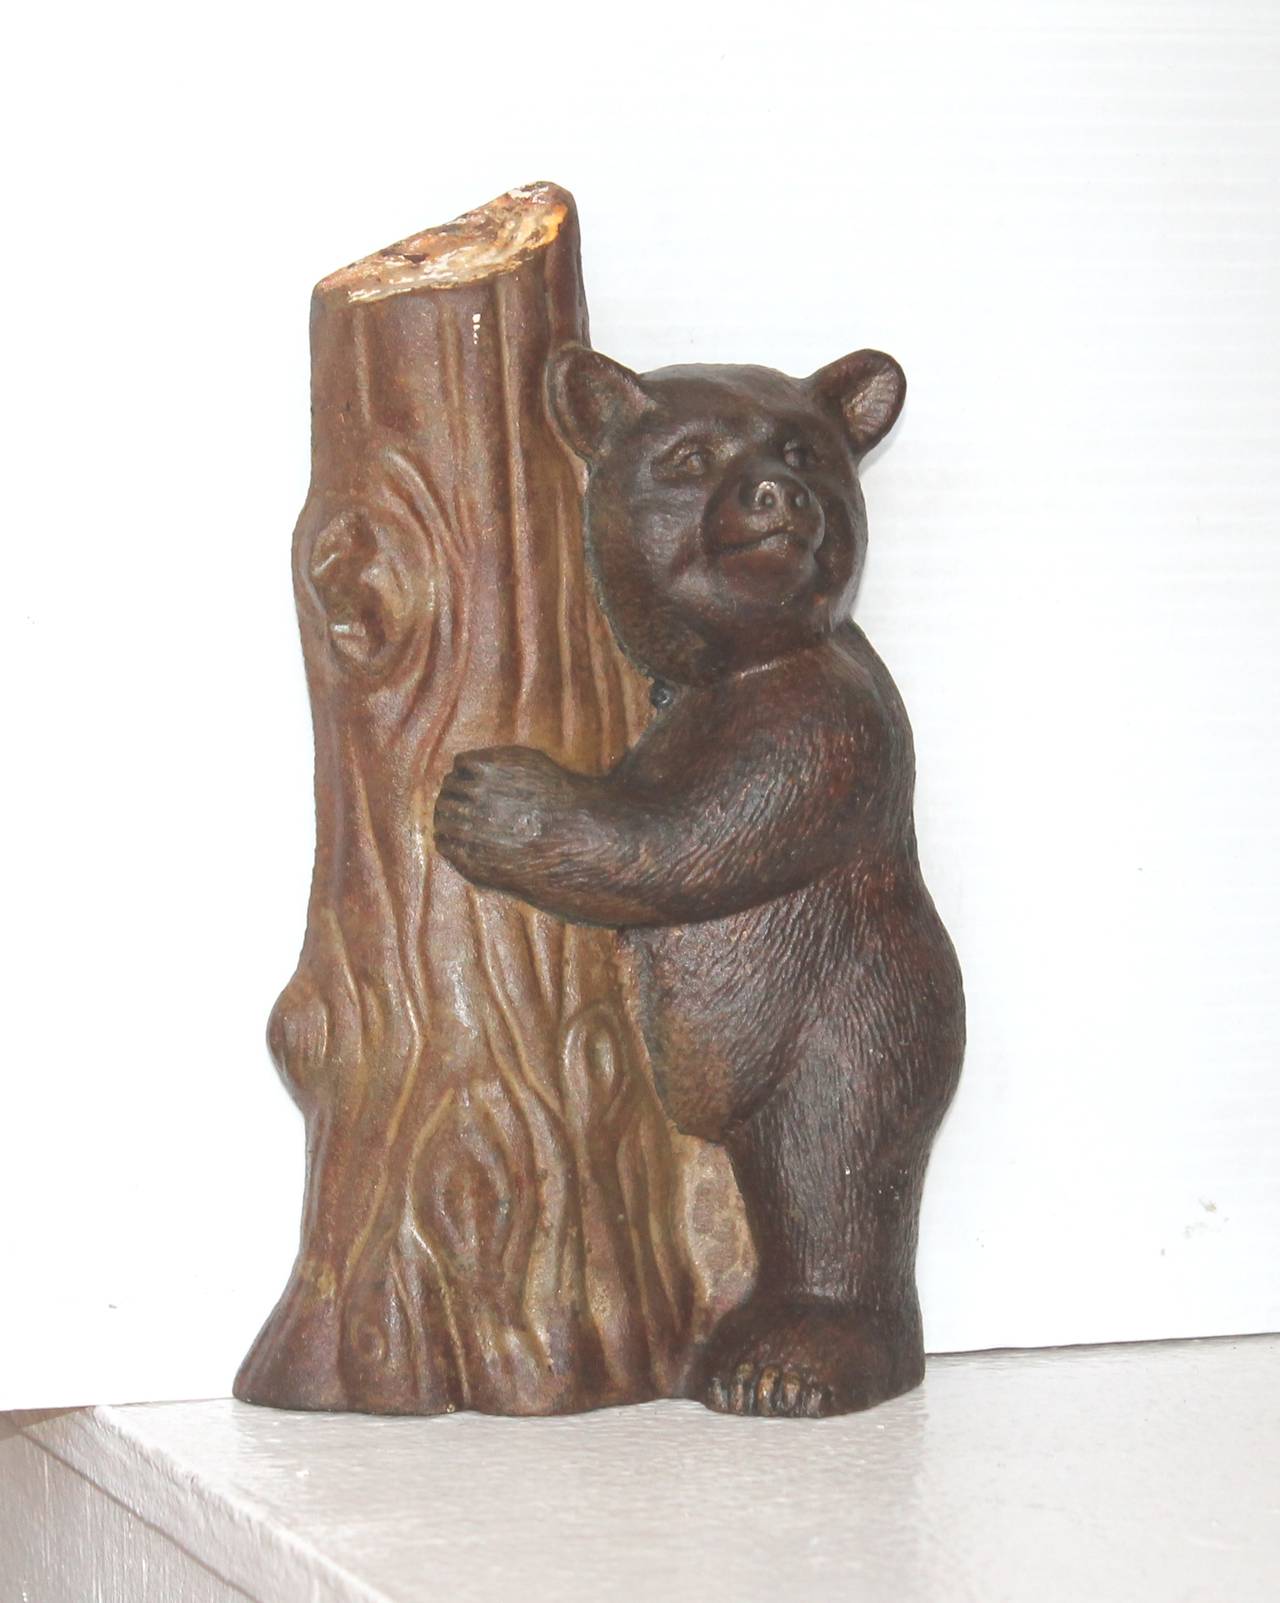 This 19th century original painted cast iron bear hugging the tree. Maybe she was getting ready to climb up the tree. The painted surface is the best. The condition is very good.